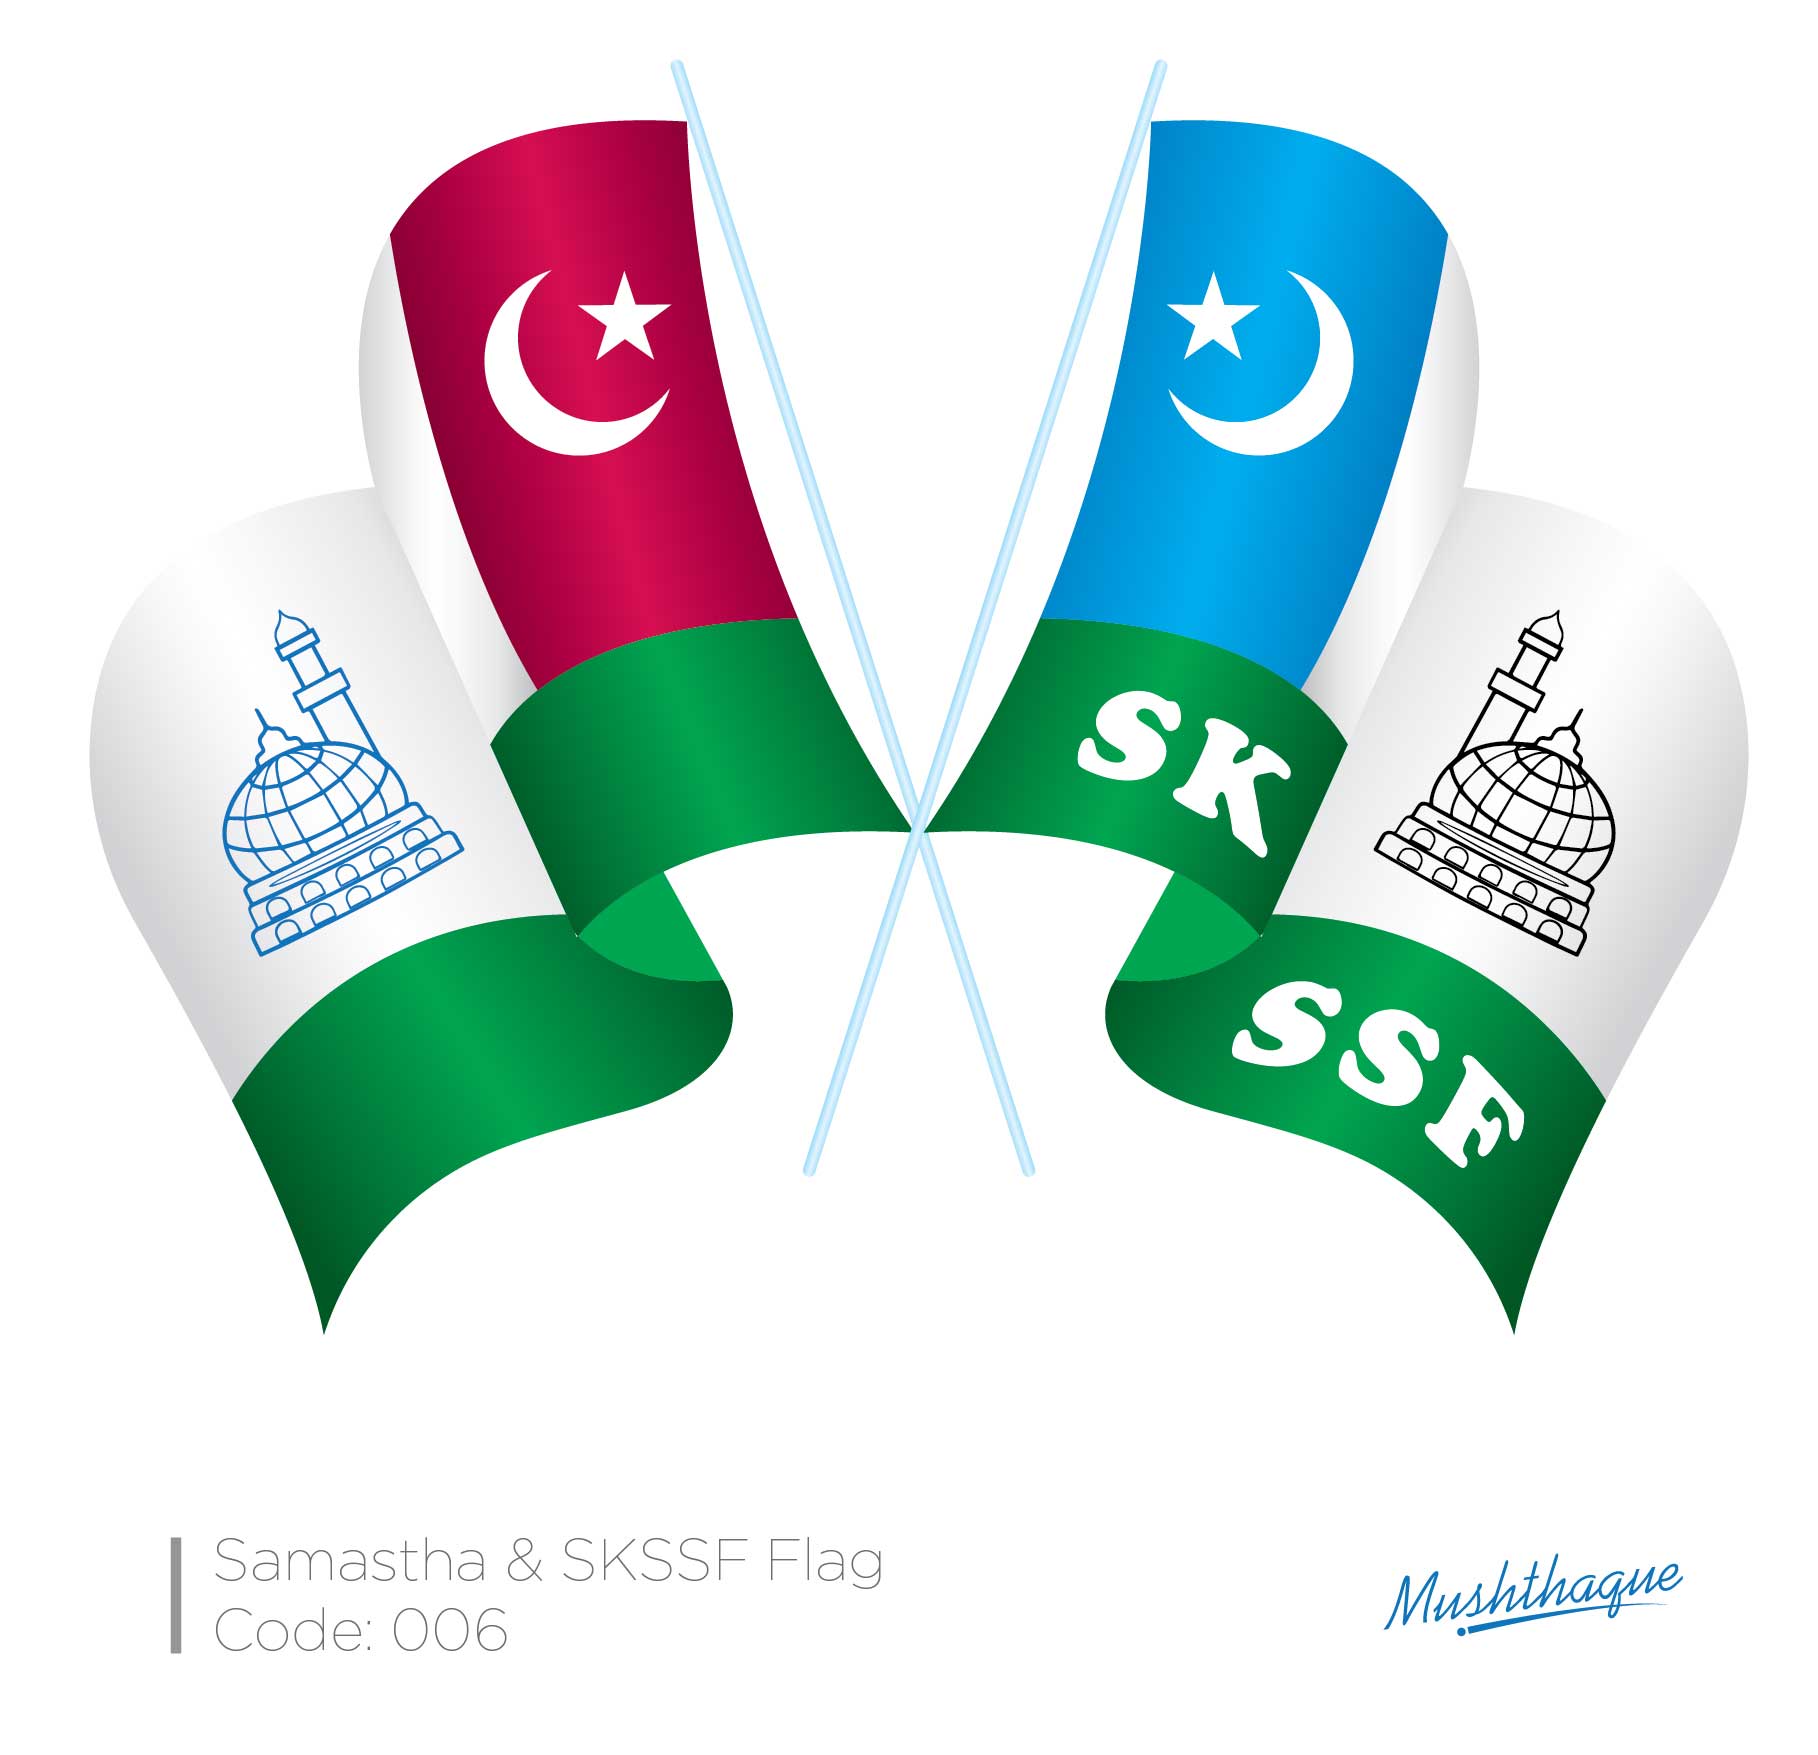 SKSSF Free Image Stock | Samastha Leaders, Flags, Posters Images by